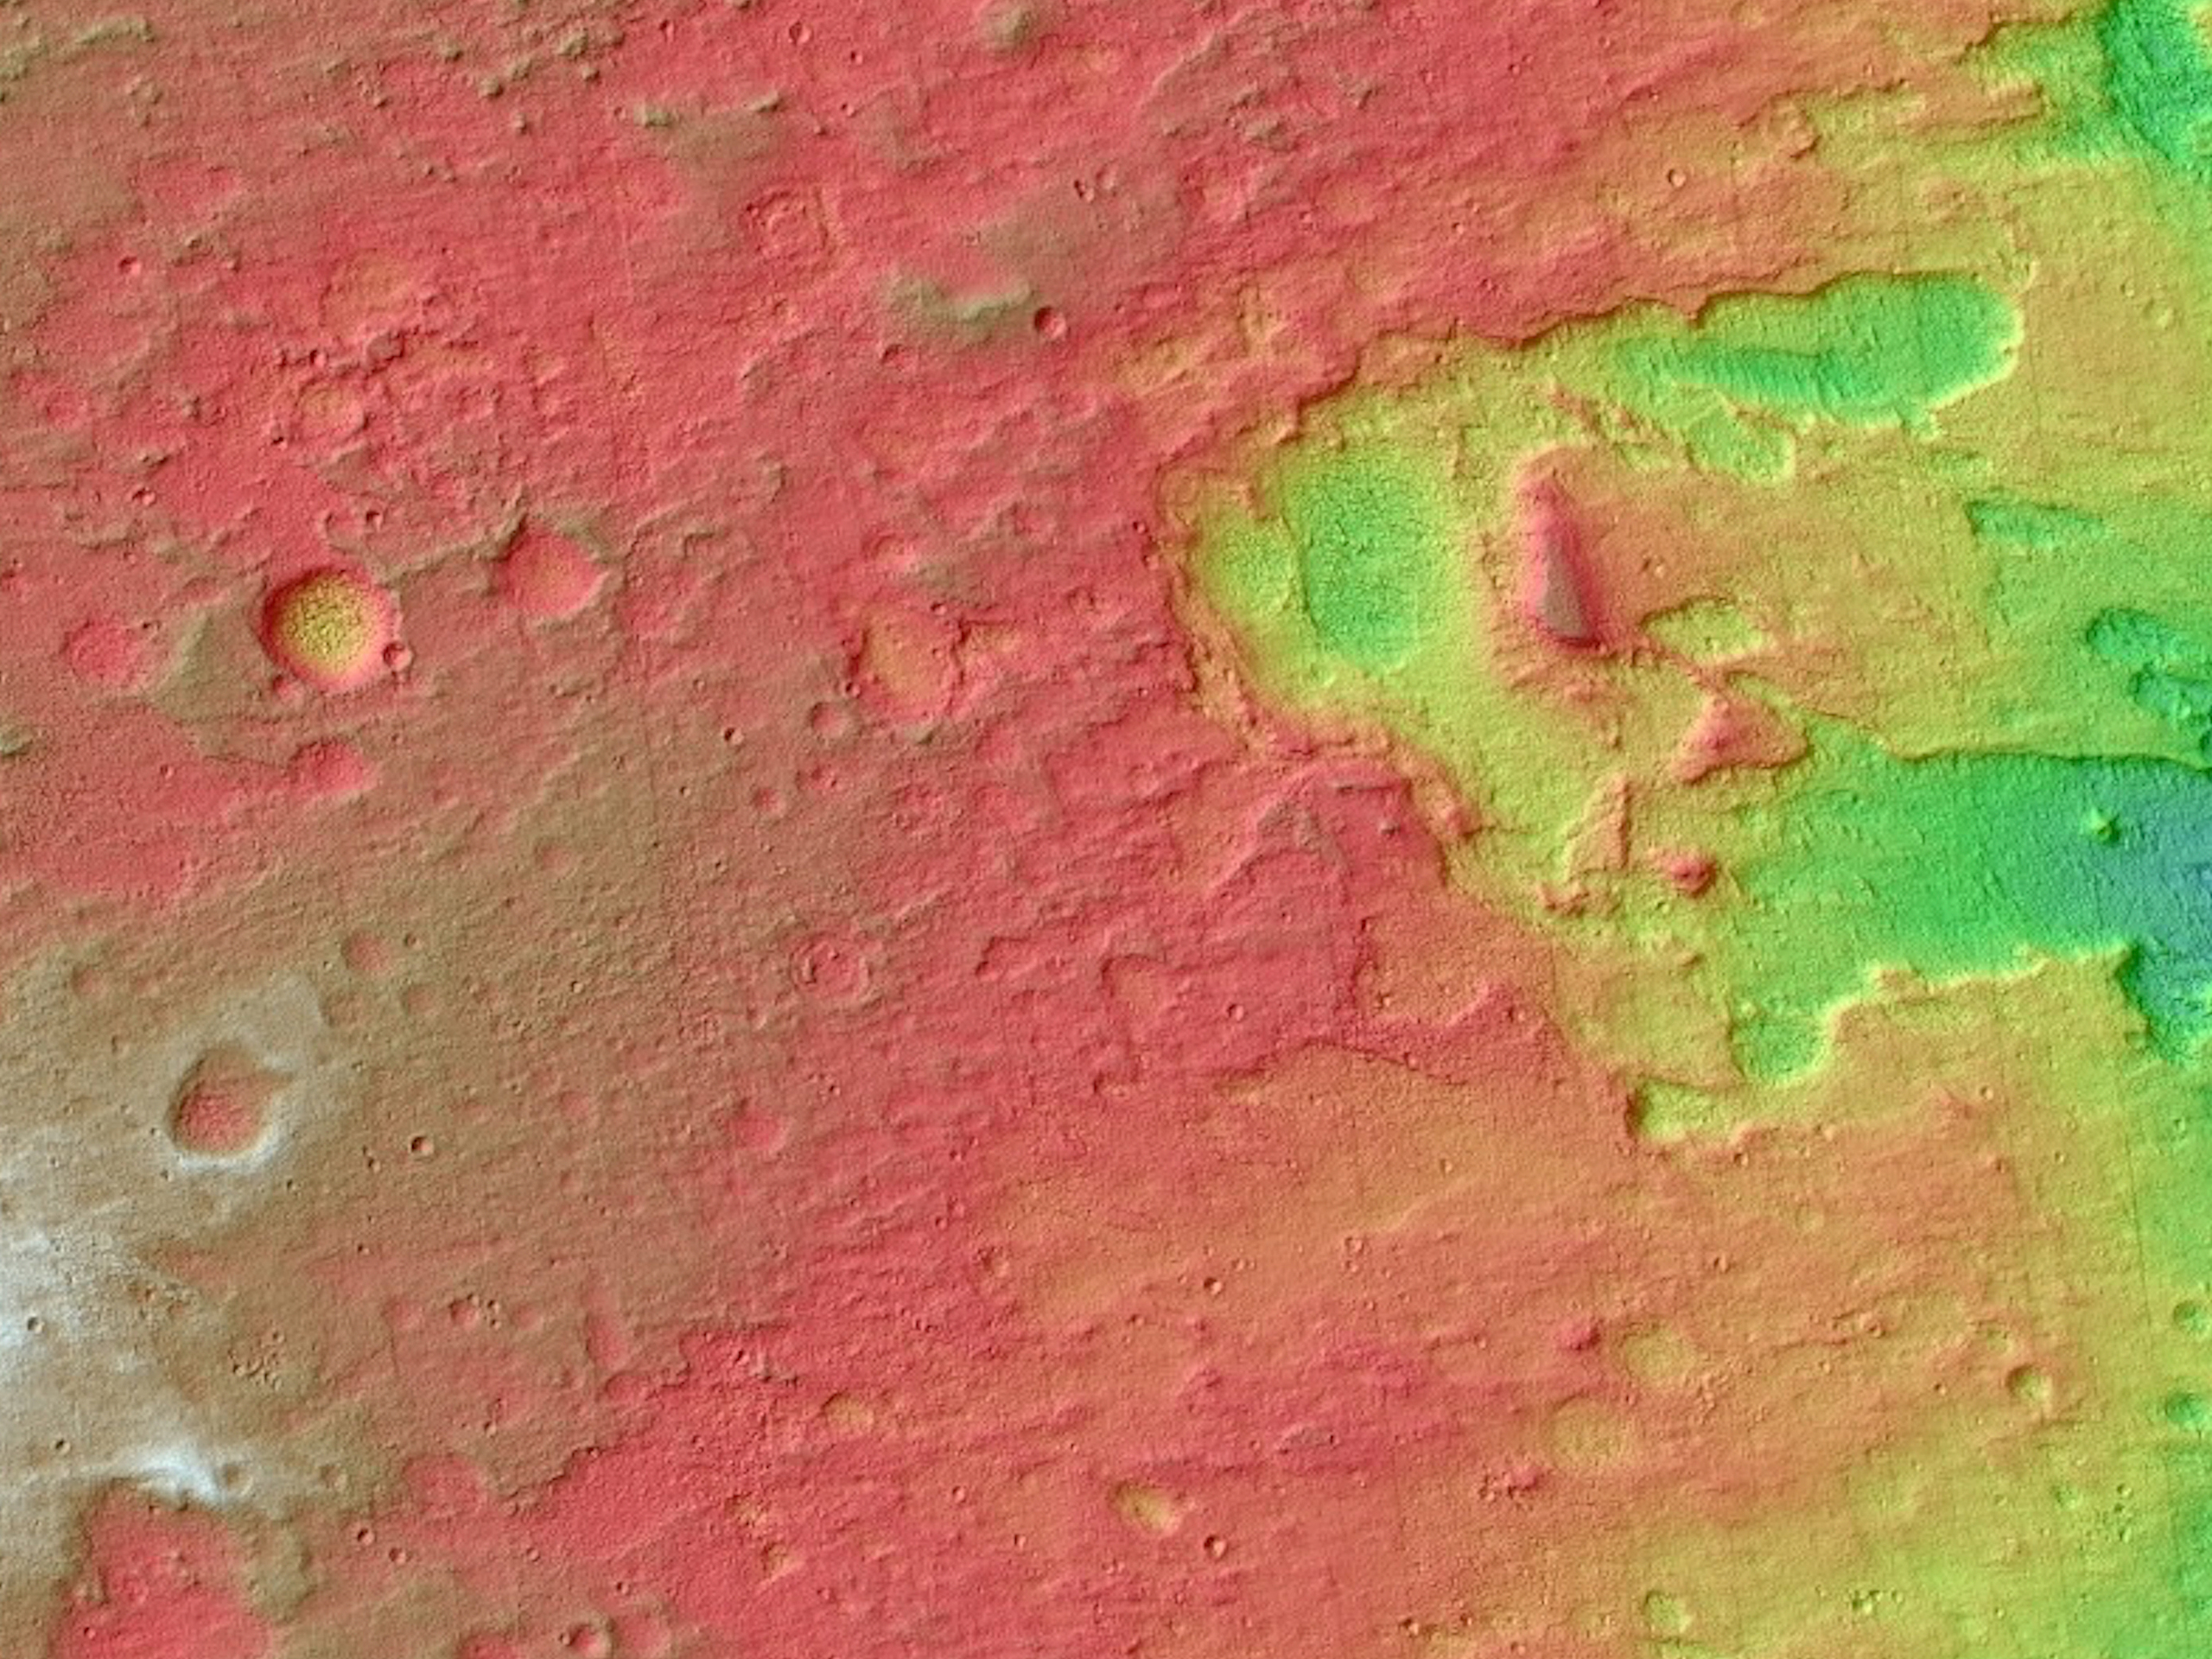 A Possible Landing Site for the ExoMars Rover at Hypanis Vallis